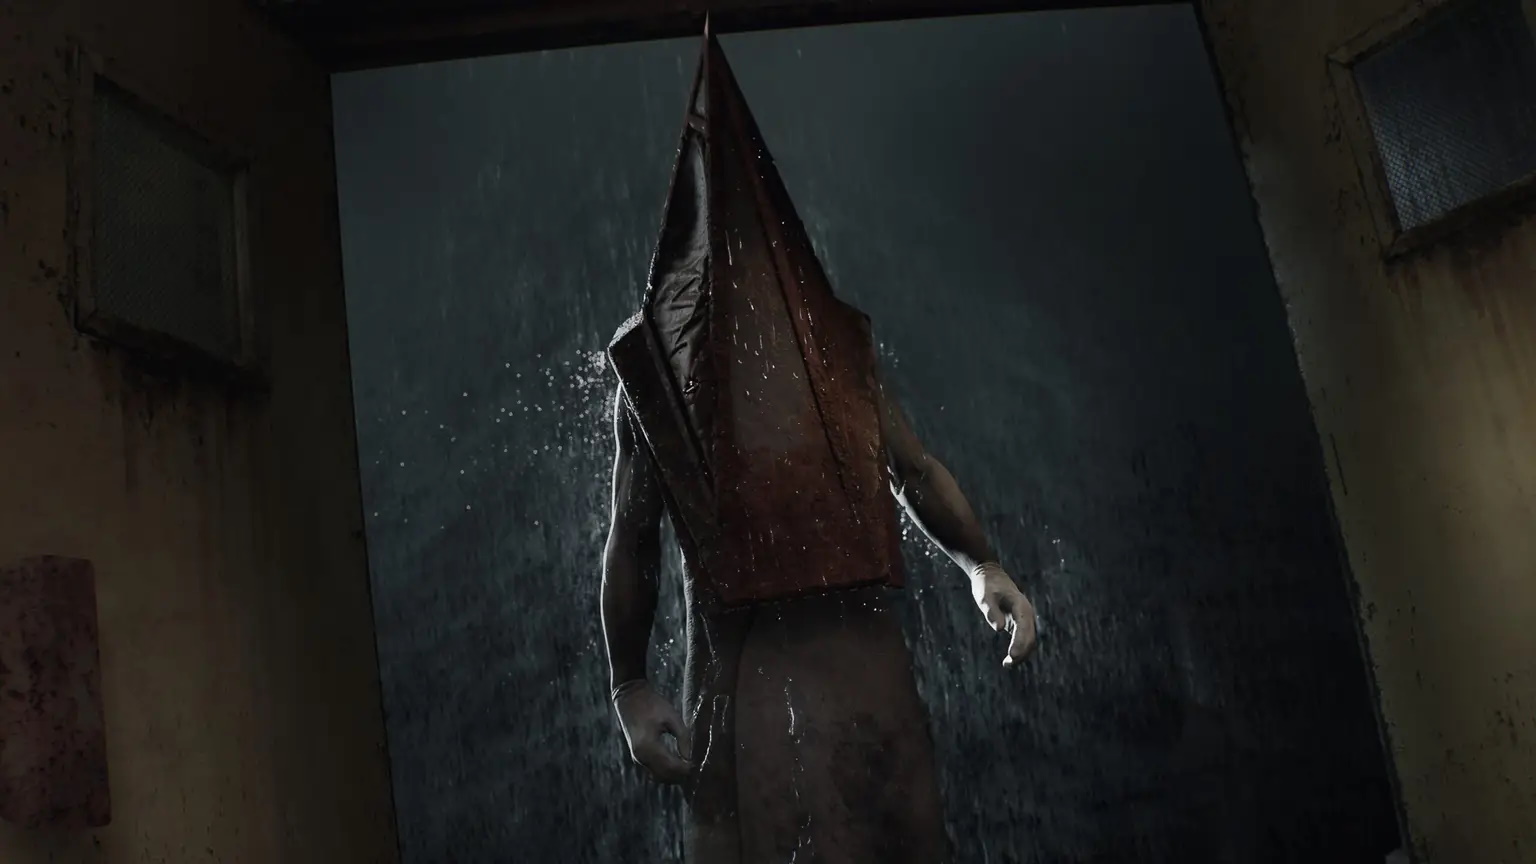 Here are all the announcements from the Silent Hill Transmission